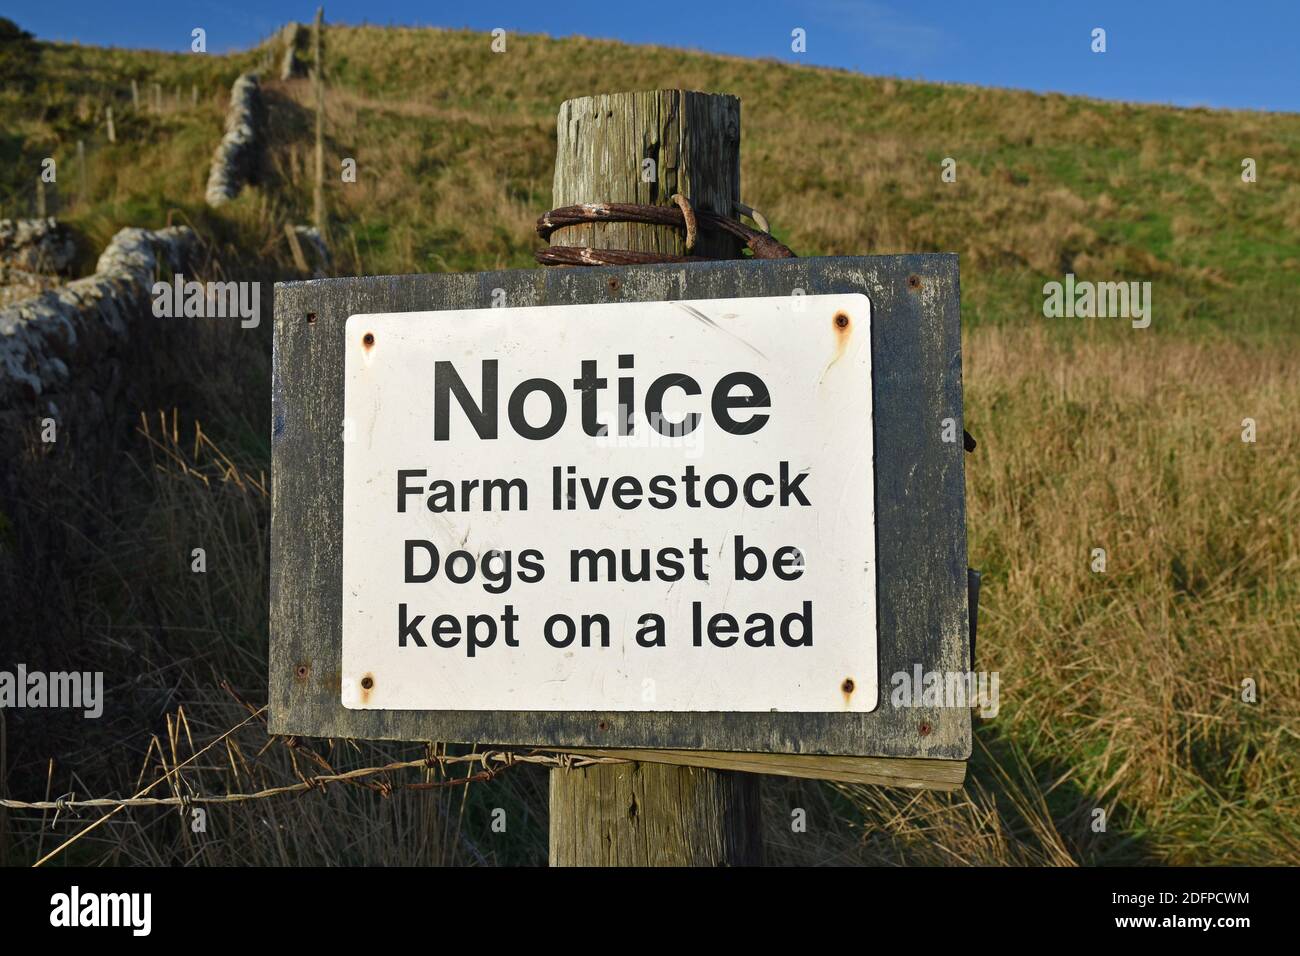 Isolated black and white sign with text: Notice Farm livestock Dogs must be kept on a lead. Blurred stone wall and field background. Stock Photo